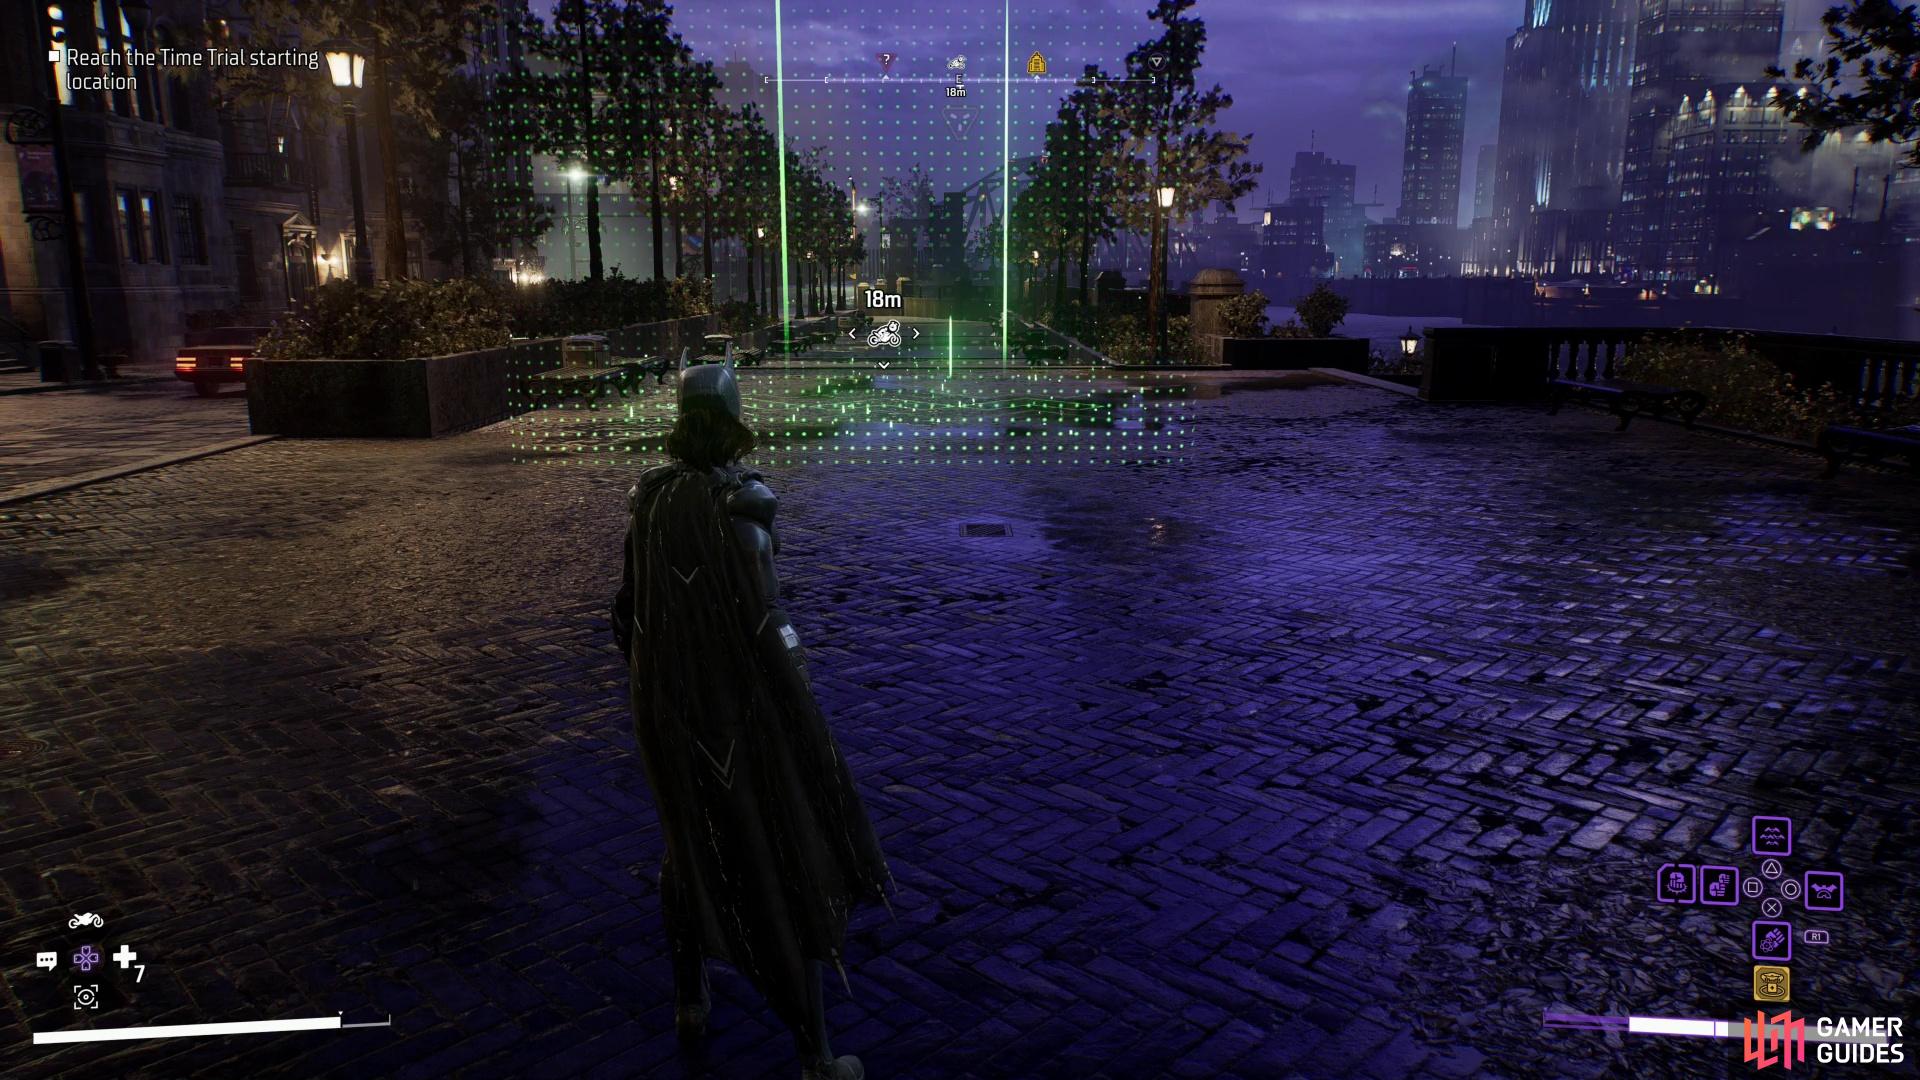 Gotham Knights: All Secret Identity Compromised Locations